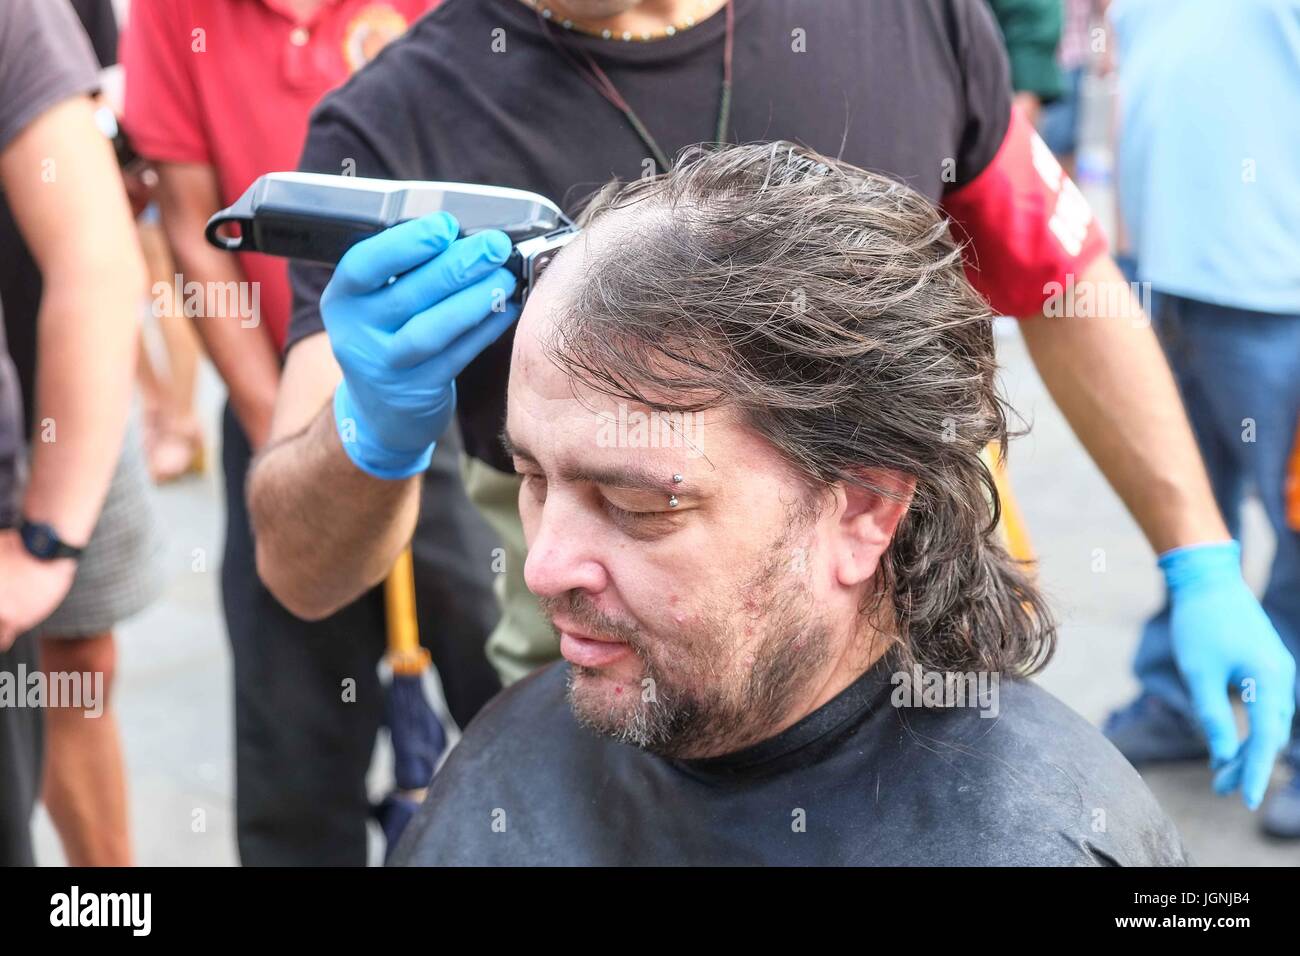 London, UK. 8th July, 2017. Who is Hussain a voluntary organisation feed the homeless, offer help with job applications and free hair cuts on The Strand, Charing Cross. This is the charity's one hundredth week in operation . :Credit claire doherty Alamy/Live News. Stock Photo